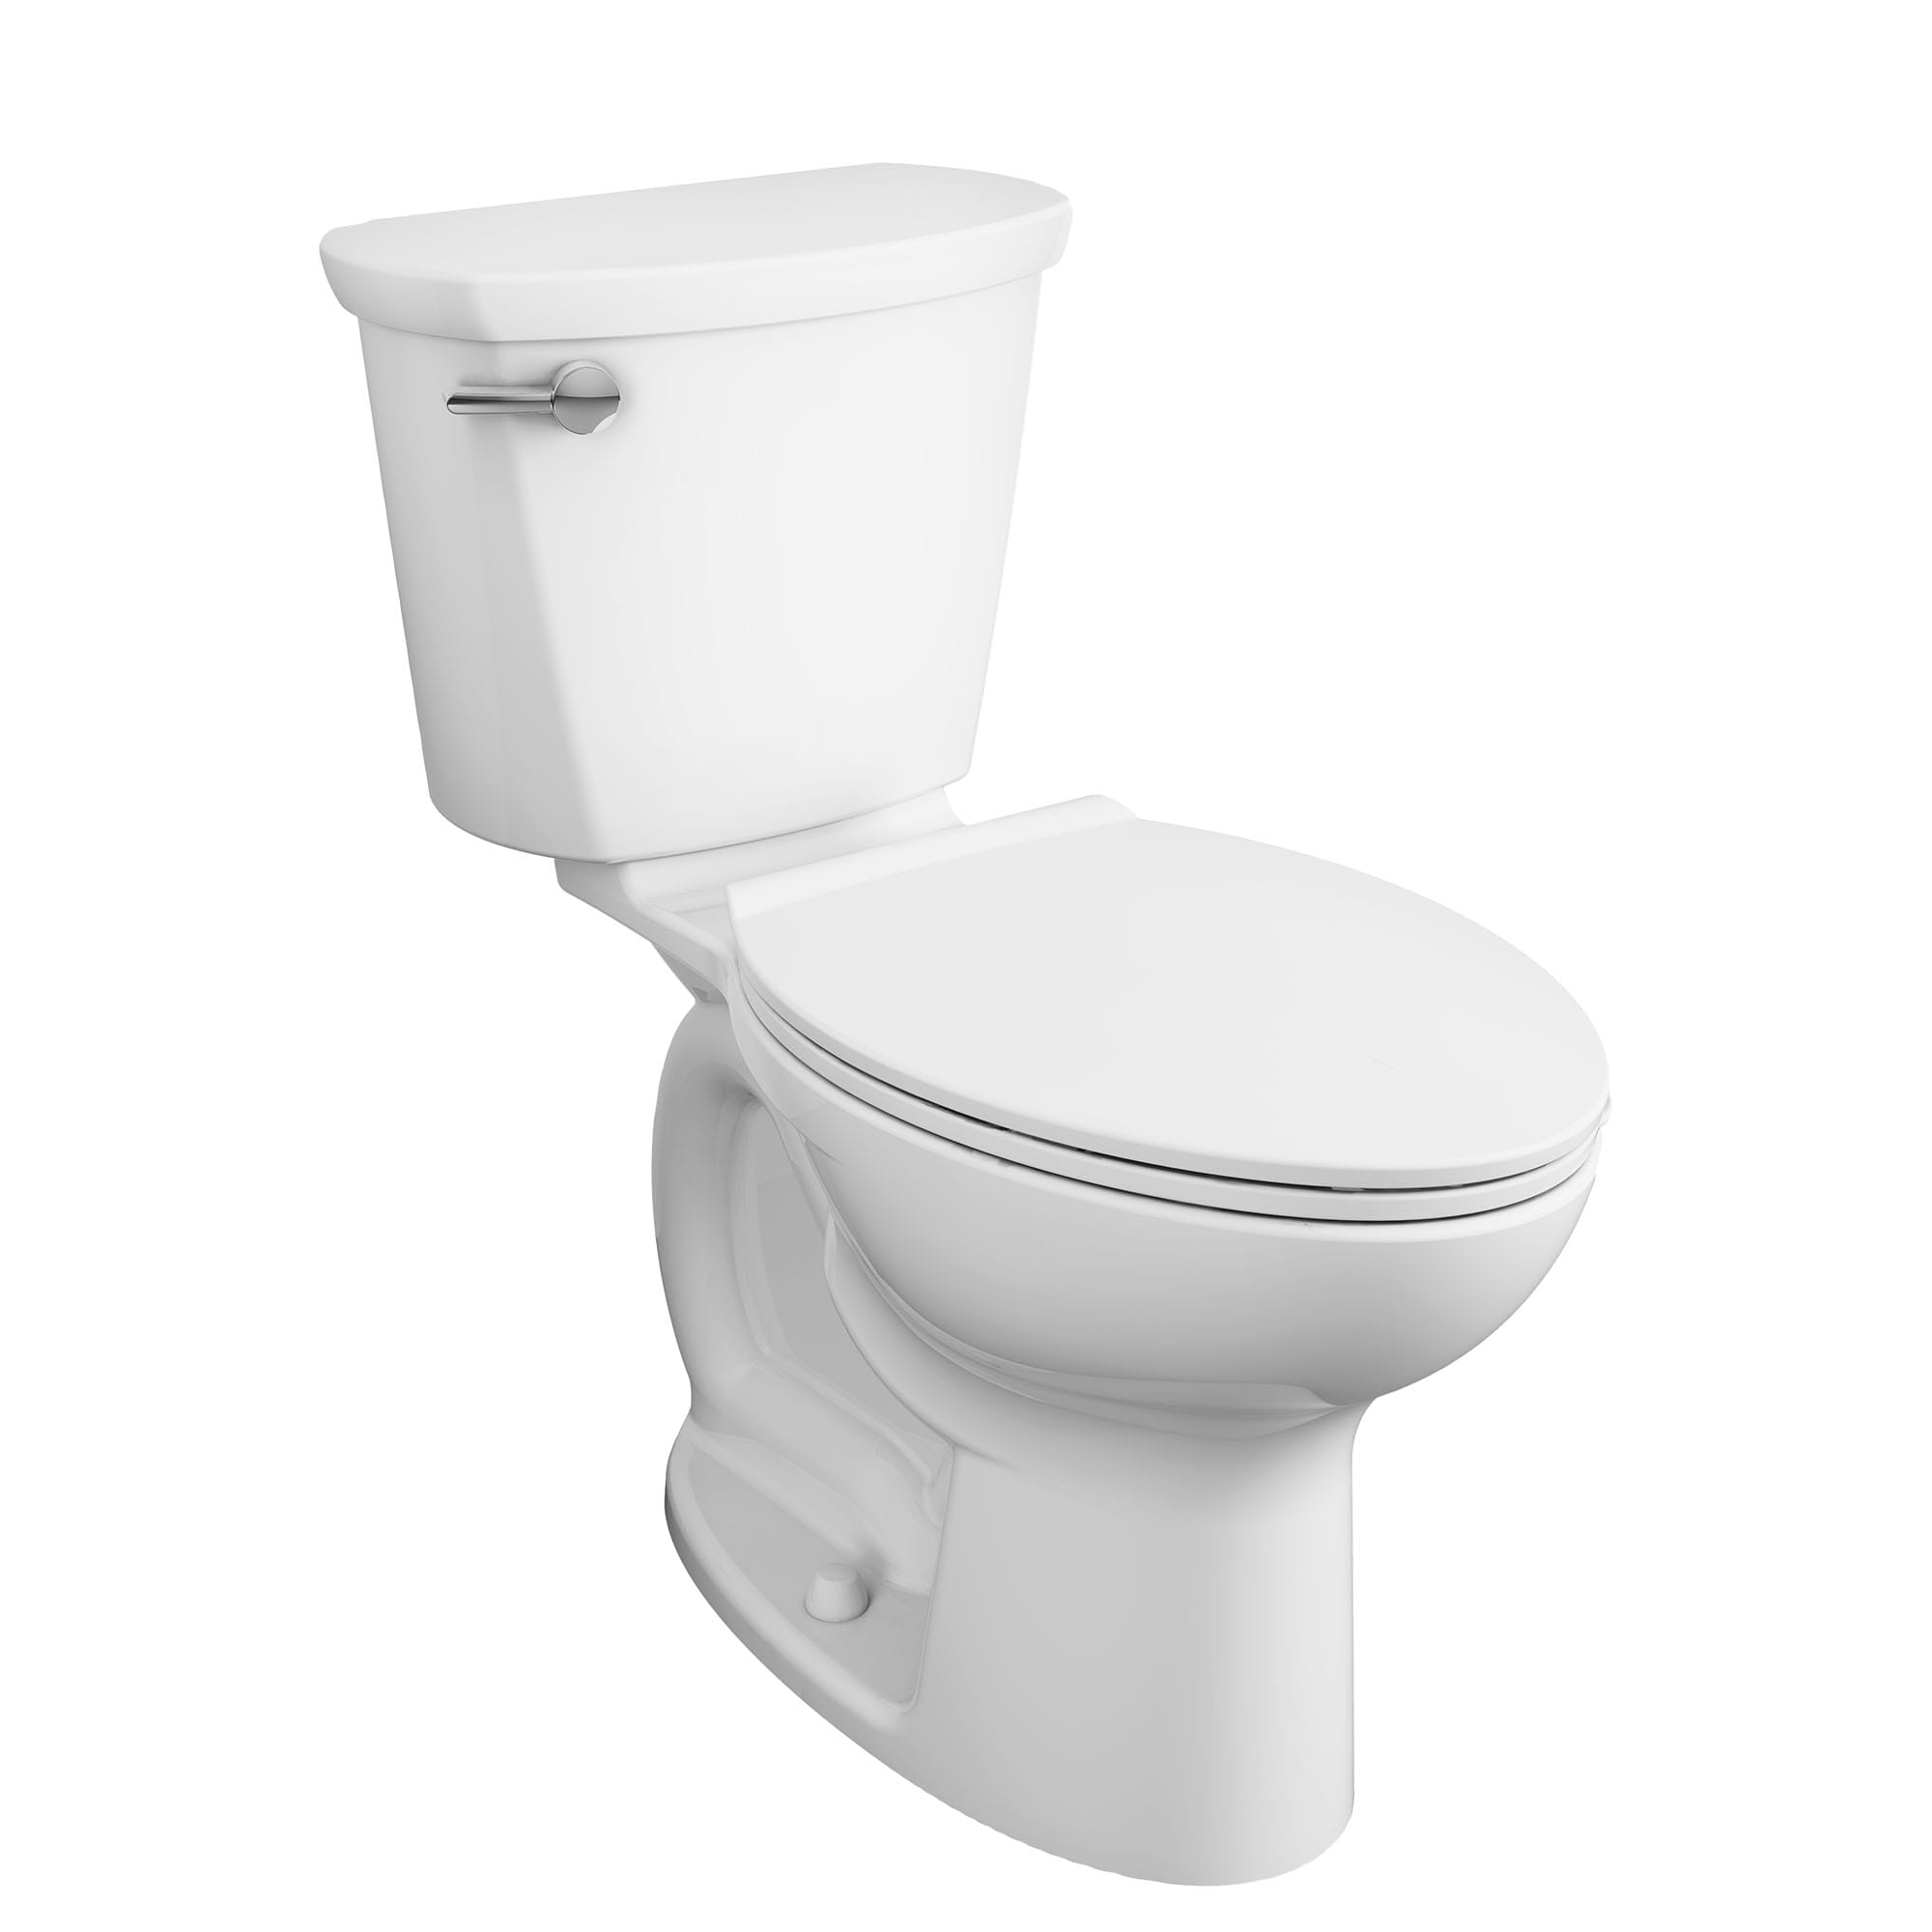 Cadet PRO Two Piece 128 gpf 48 Lpf Compact Chair Height Elongated 14 Inch Rough Toilet Less Seat WHITE